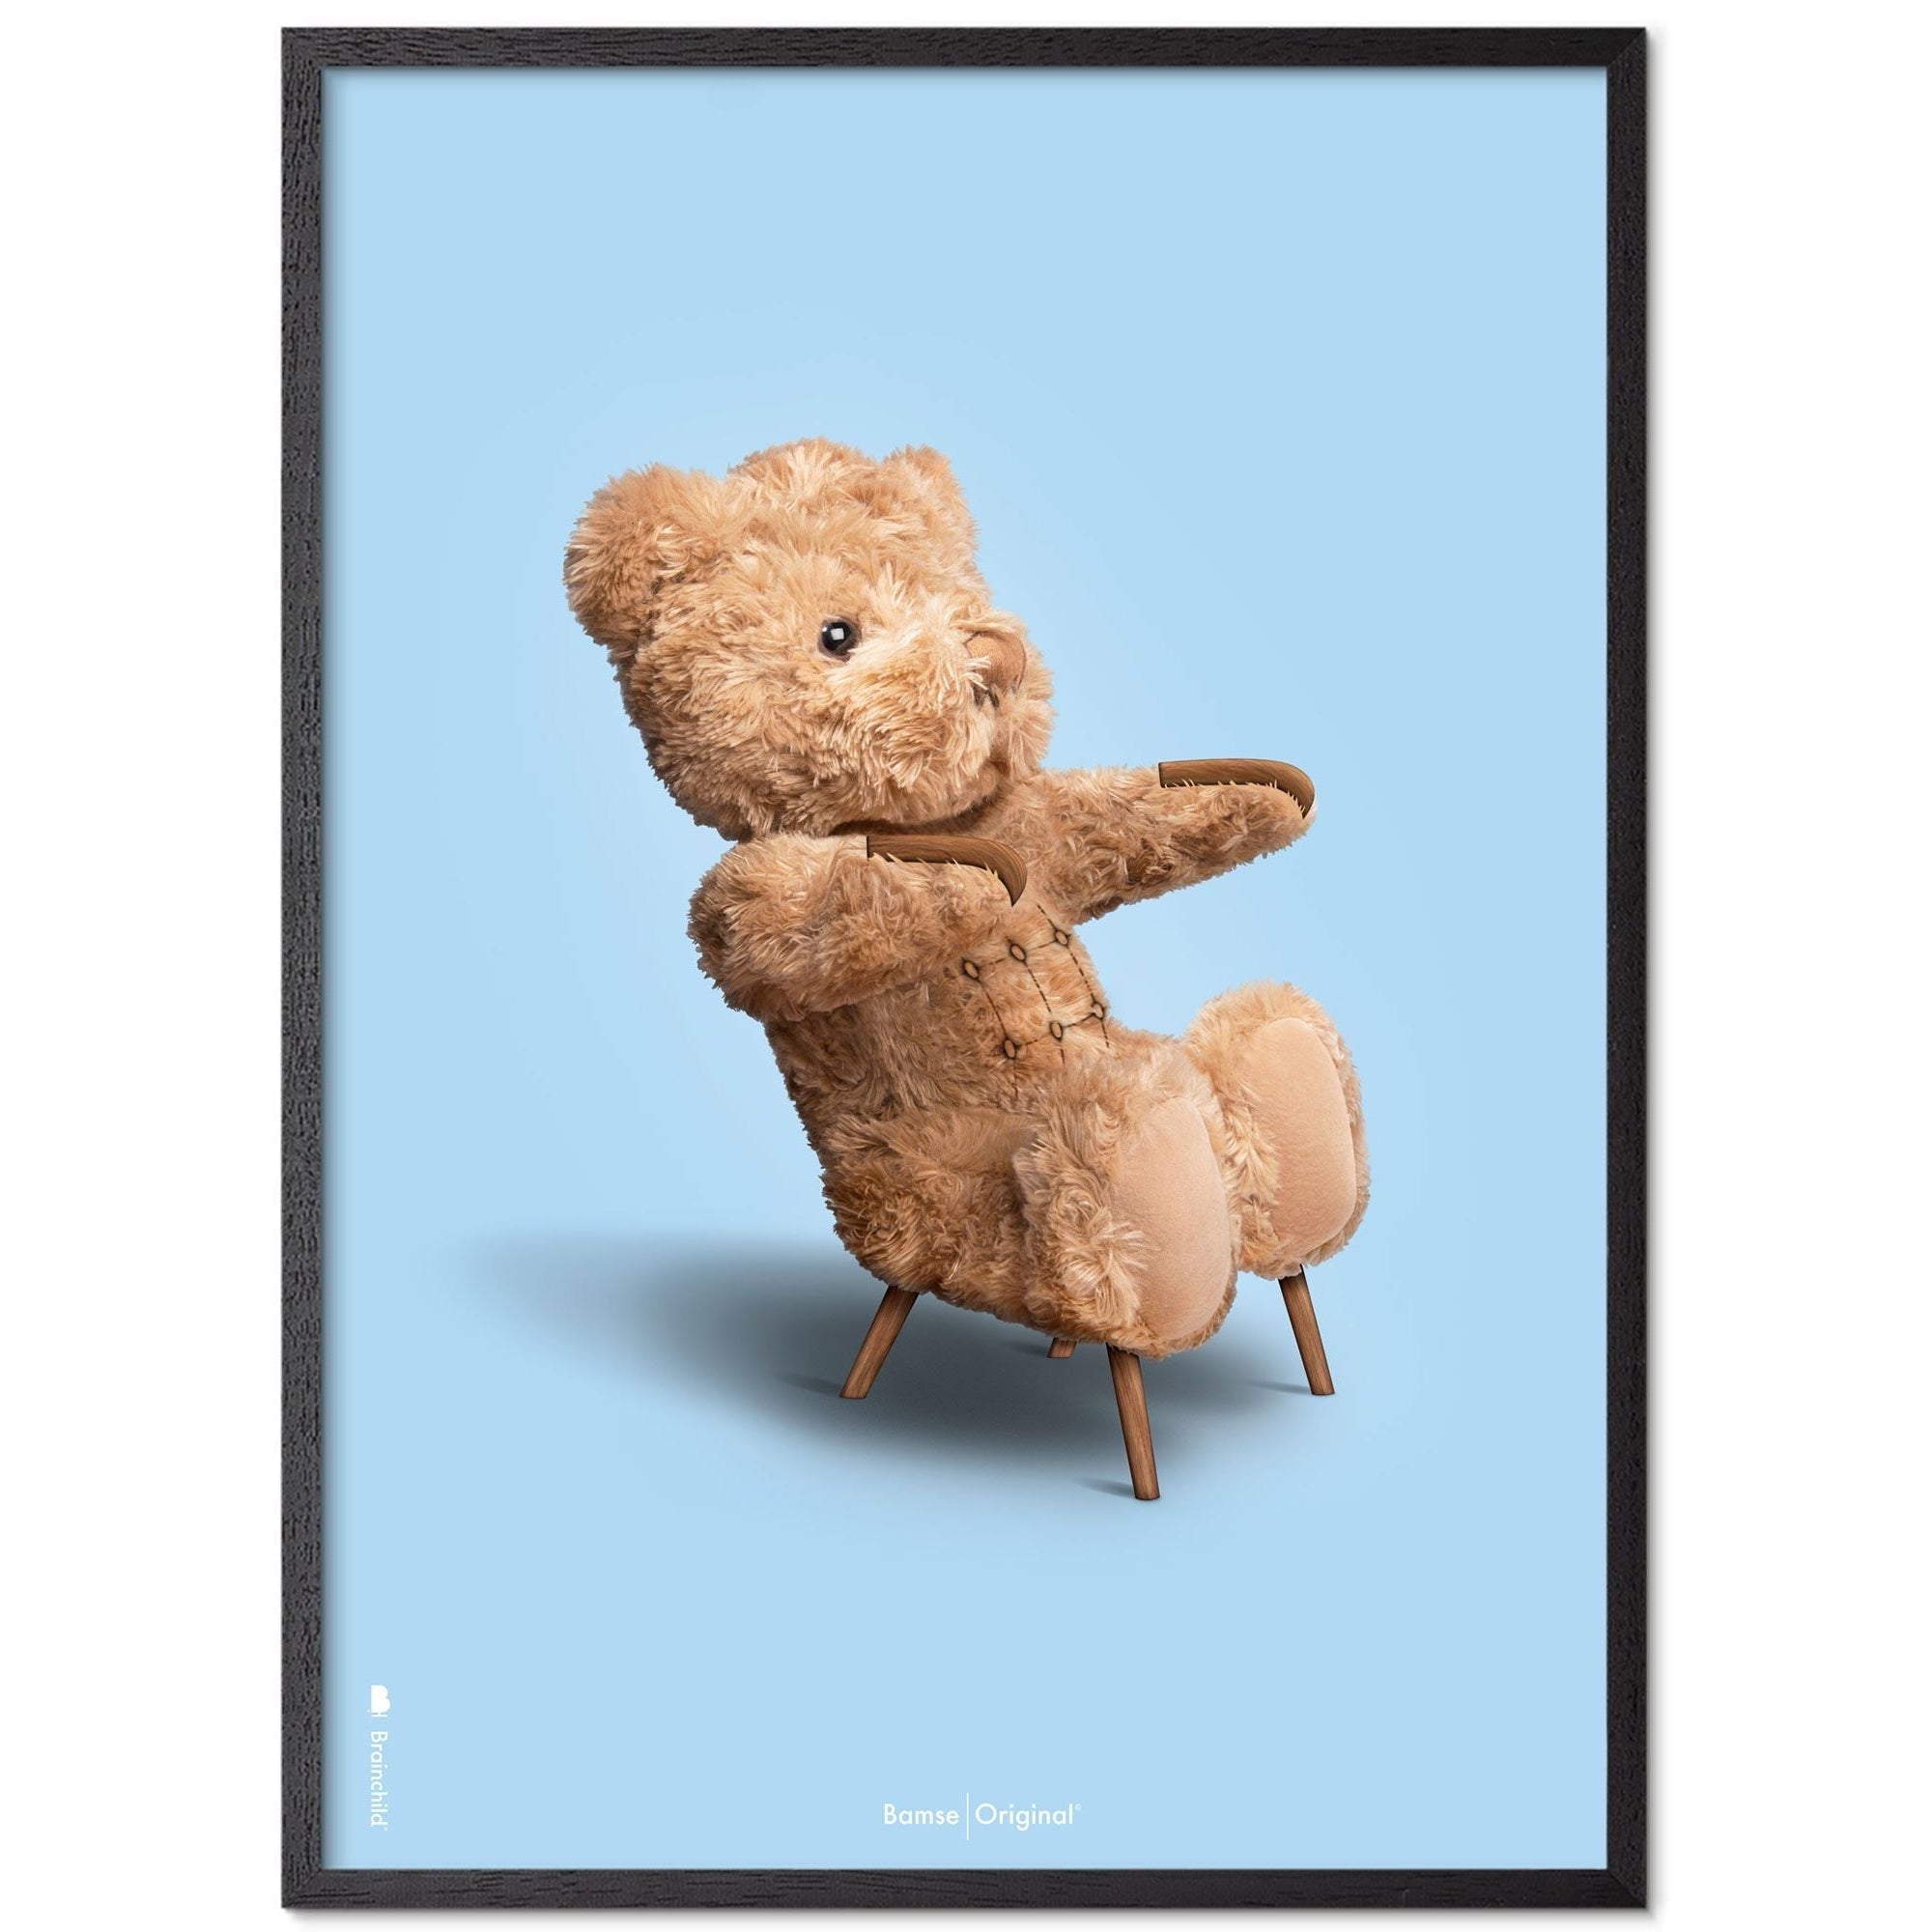 Brainchild Teddy Bear Classic Poster Frame Made Of Black Lacquered Wood 30x40 Cm, Light Blue Background